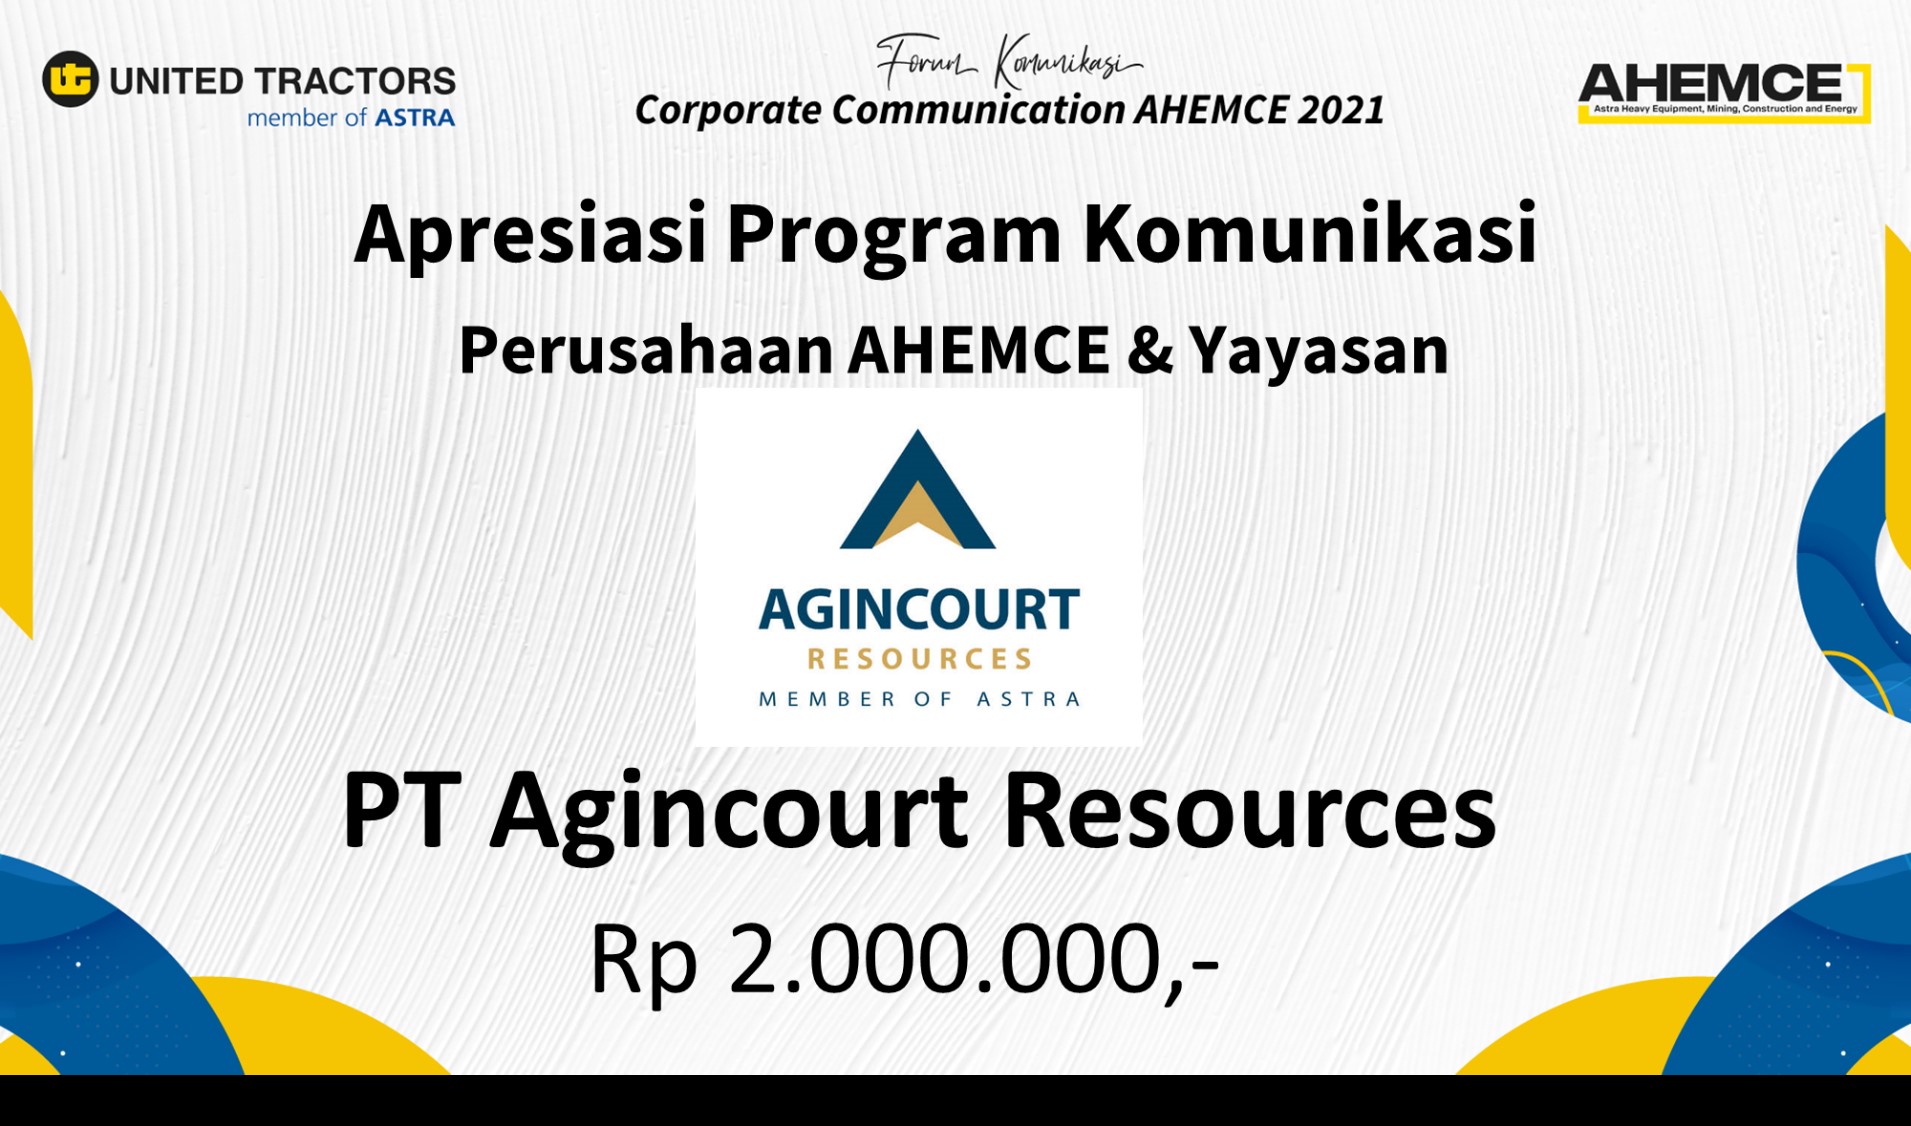 The Best Communication Program Astra Heavy Equipment, Mining, Construction, and Energy (AHEMCE) and the Foundation